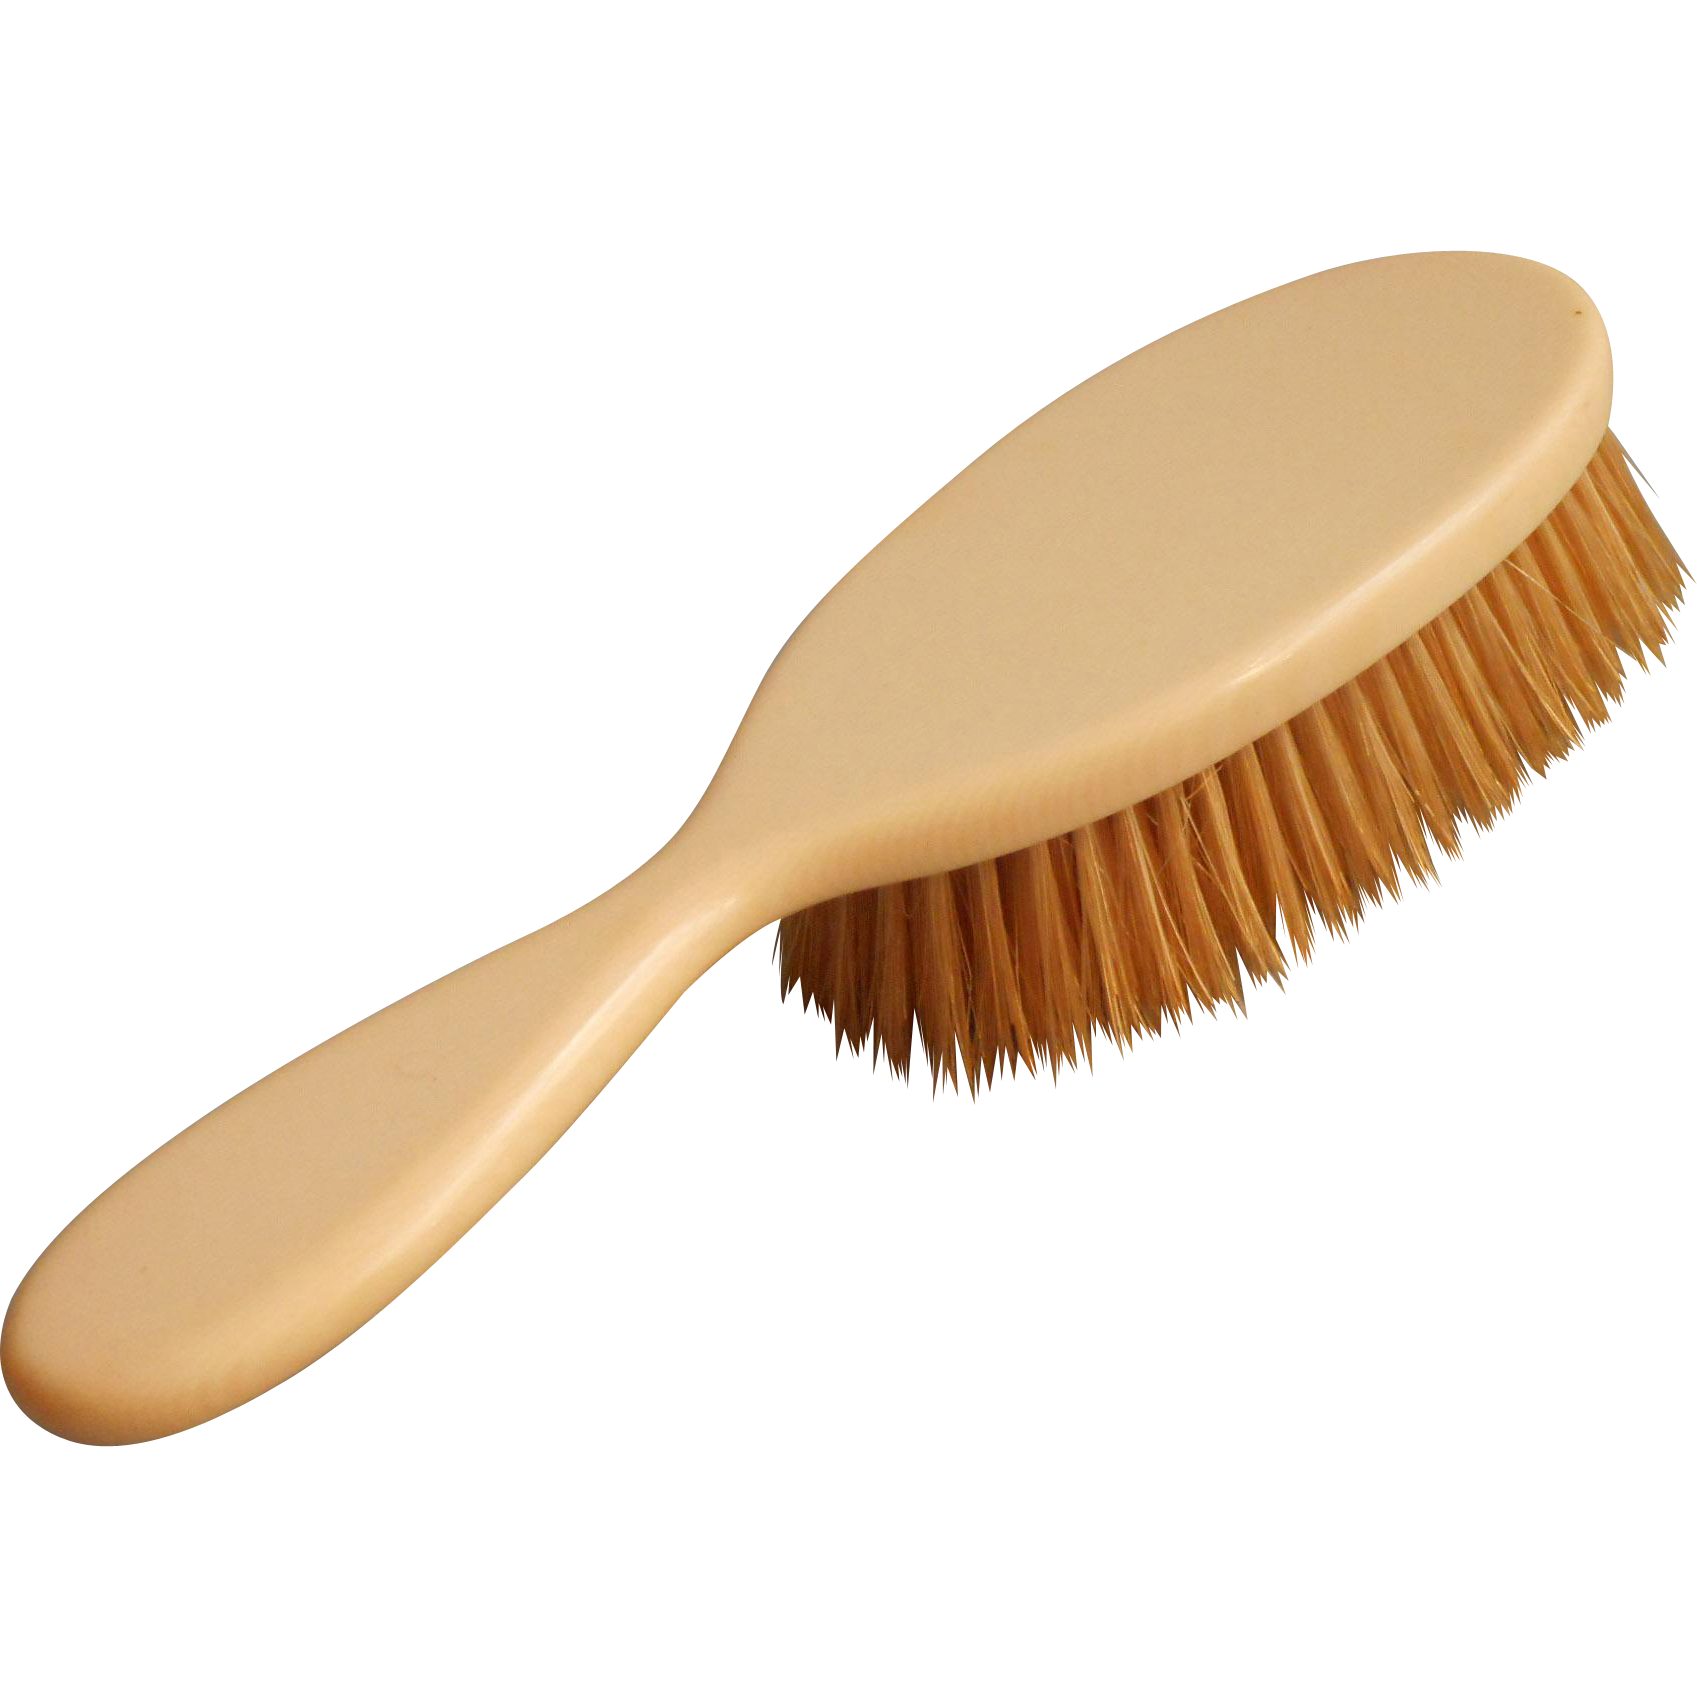 This visual is about hairbrush brush celluloid 1920s vintage freetoedit #ha...